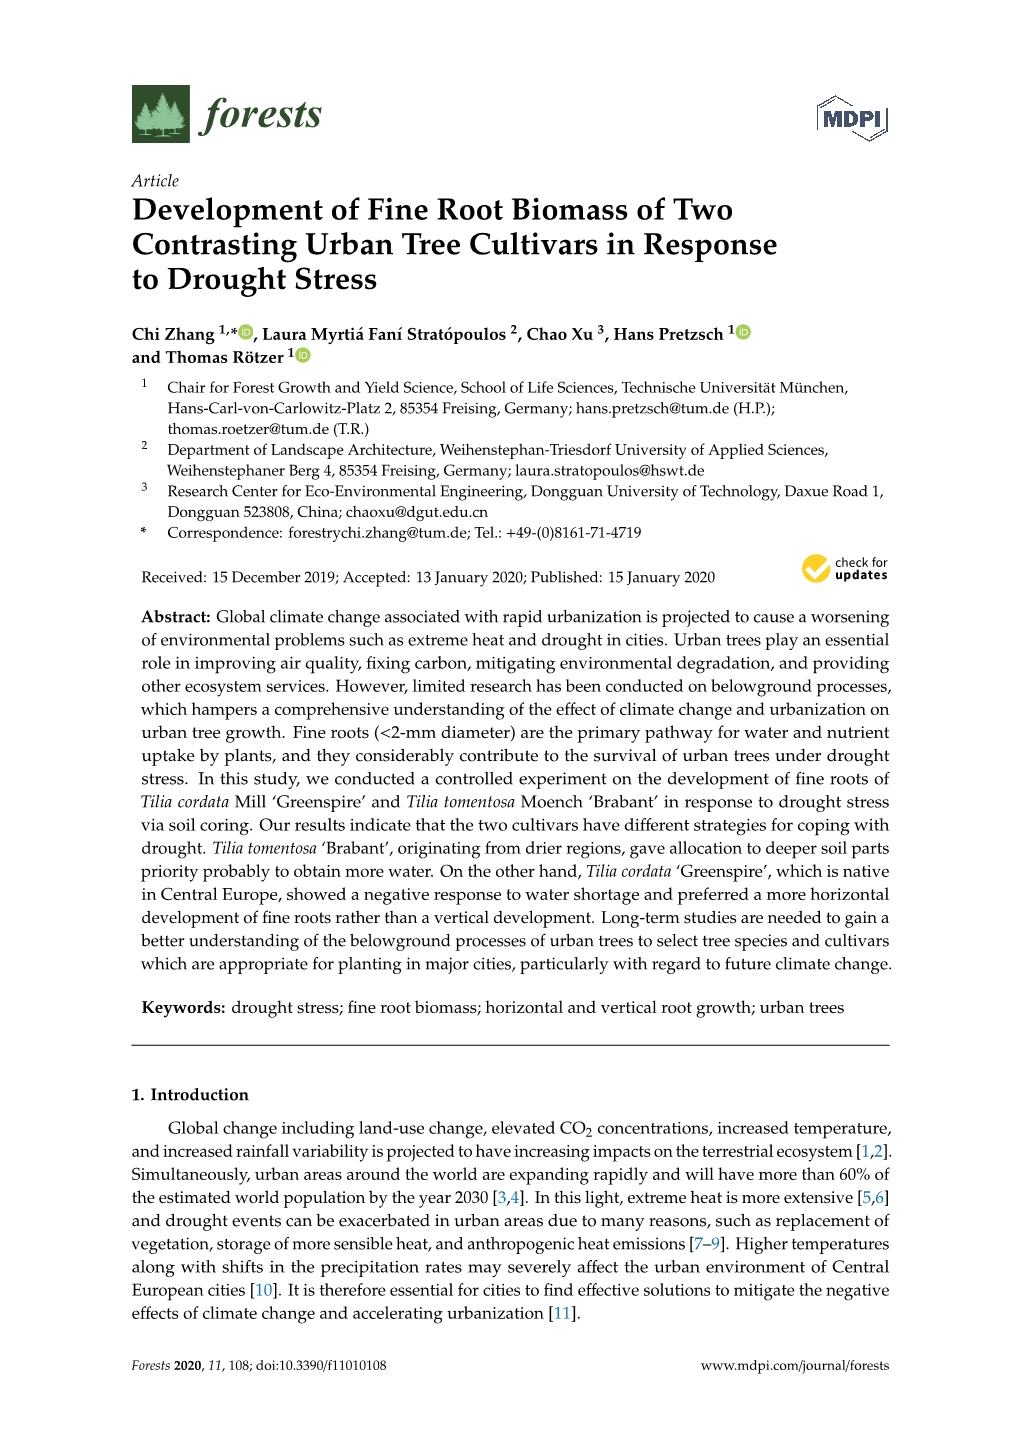 Development of Fine Root Biomass of Two Contrasting Urban Tree Cultivars in Response to Drought Stress